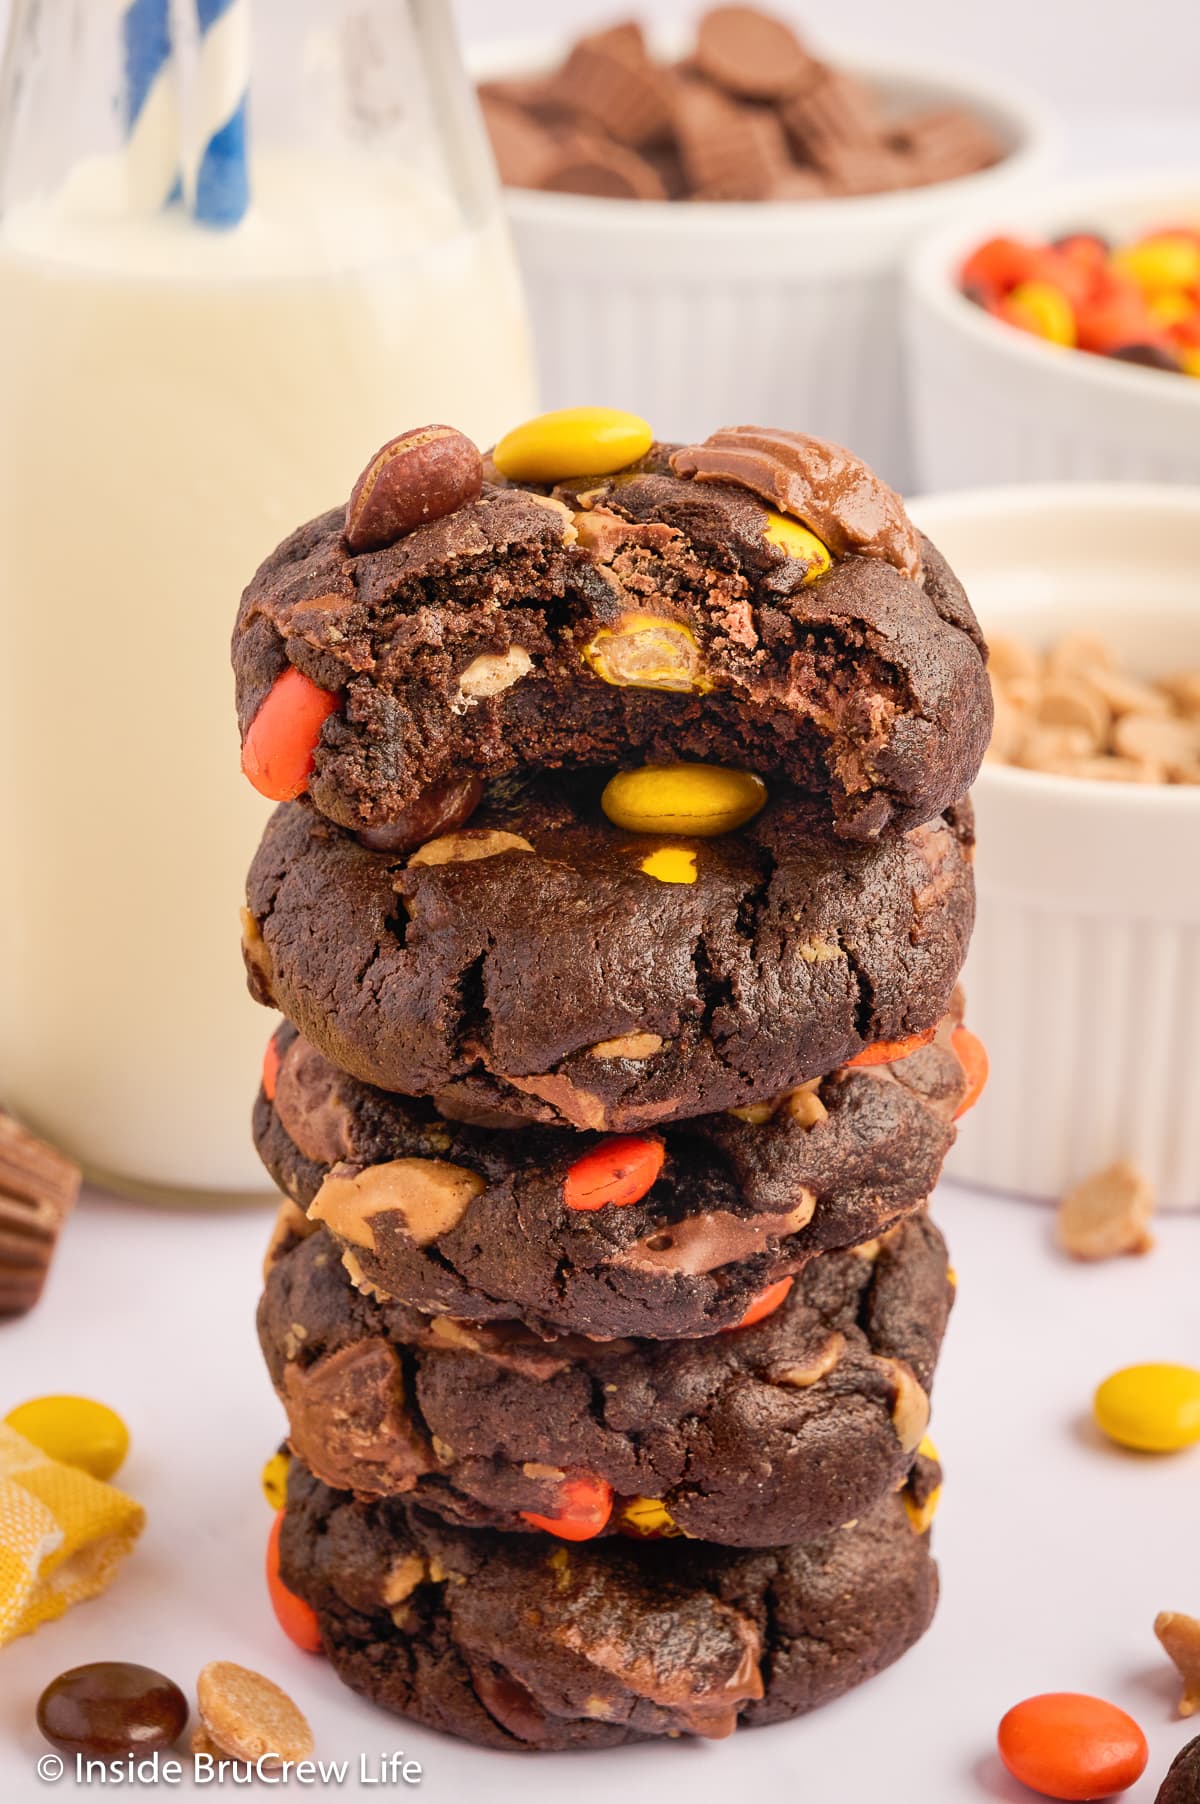 A stack of chocolate candy cookies with a bite taken out of the top cookie.